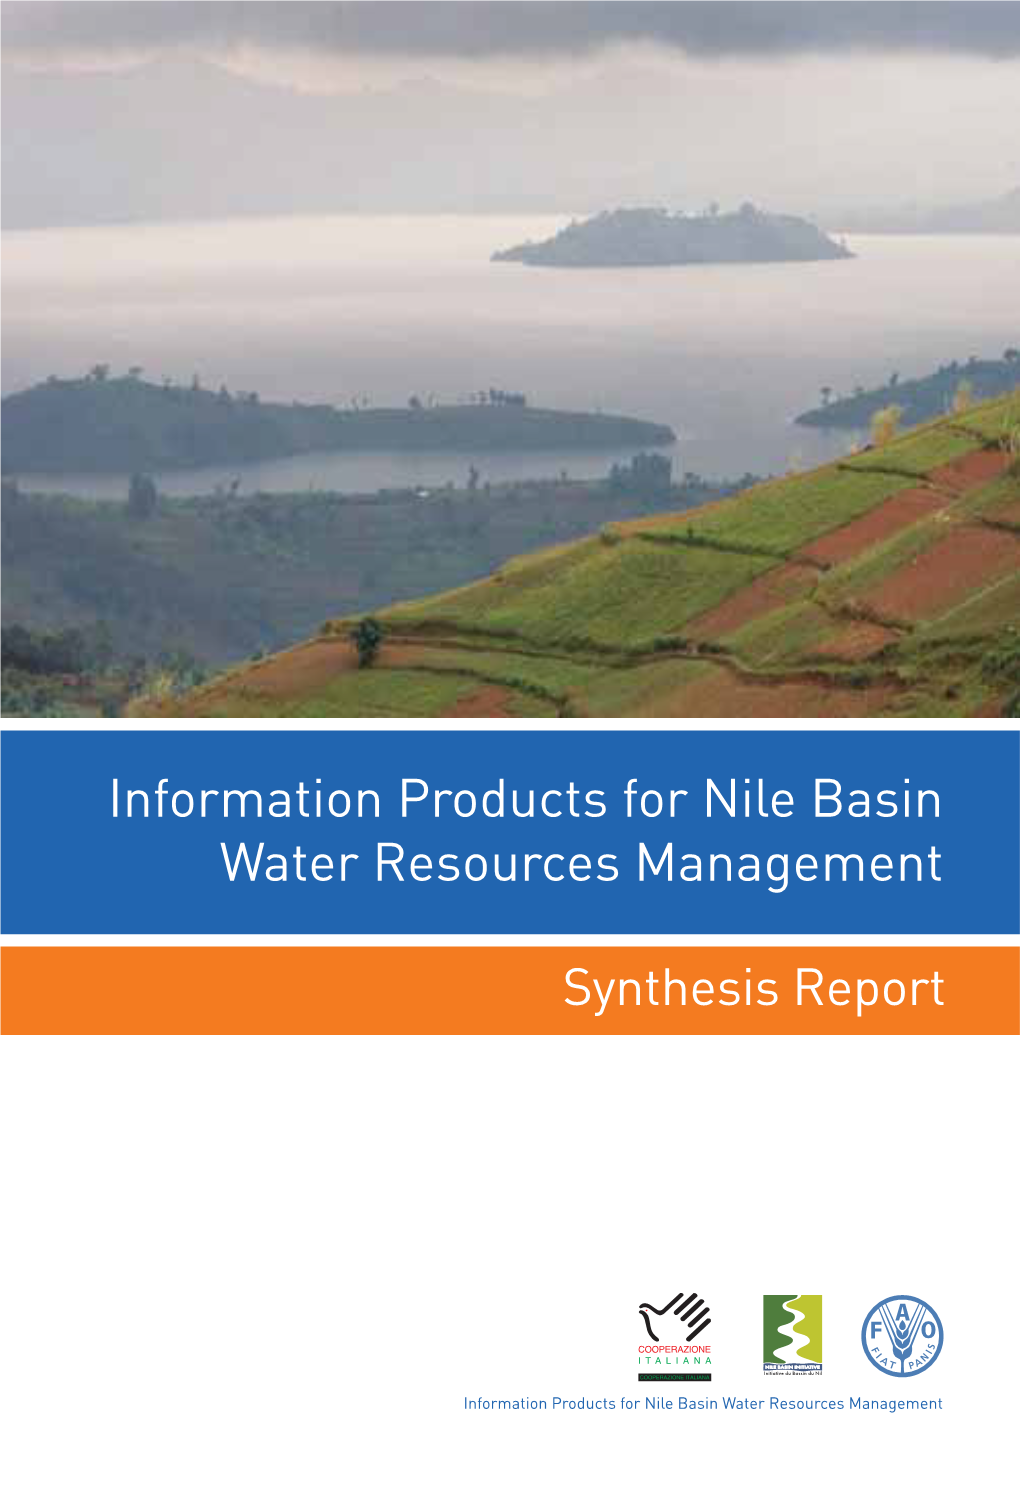 Information Products for Nile Basin Water Resources Management FAO-Nile Basin Project Synthesis Report GCP/INT/945/ITA 2004 to 2009